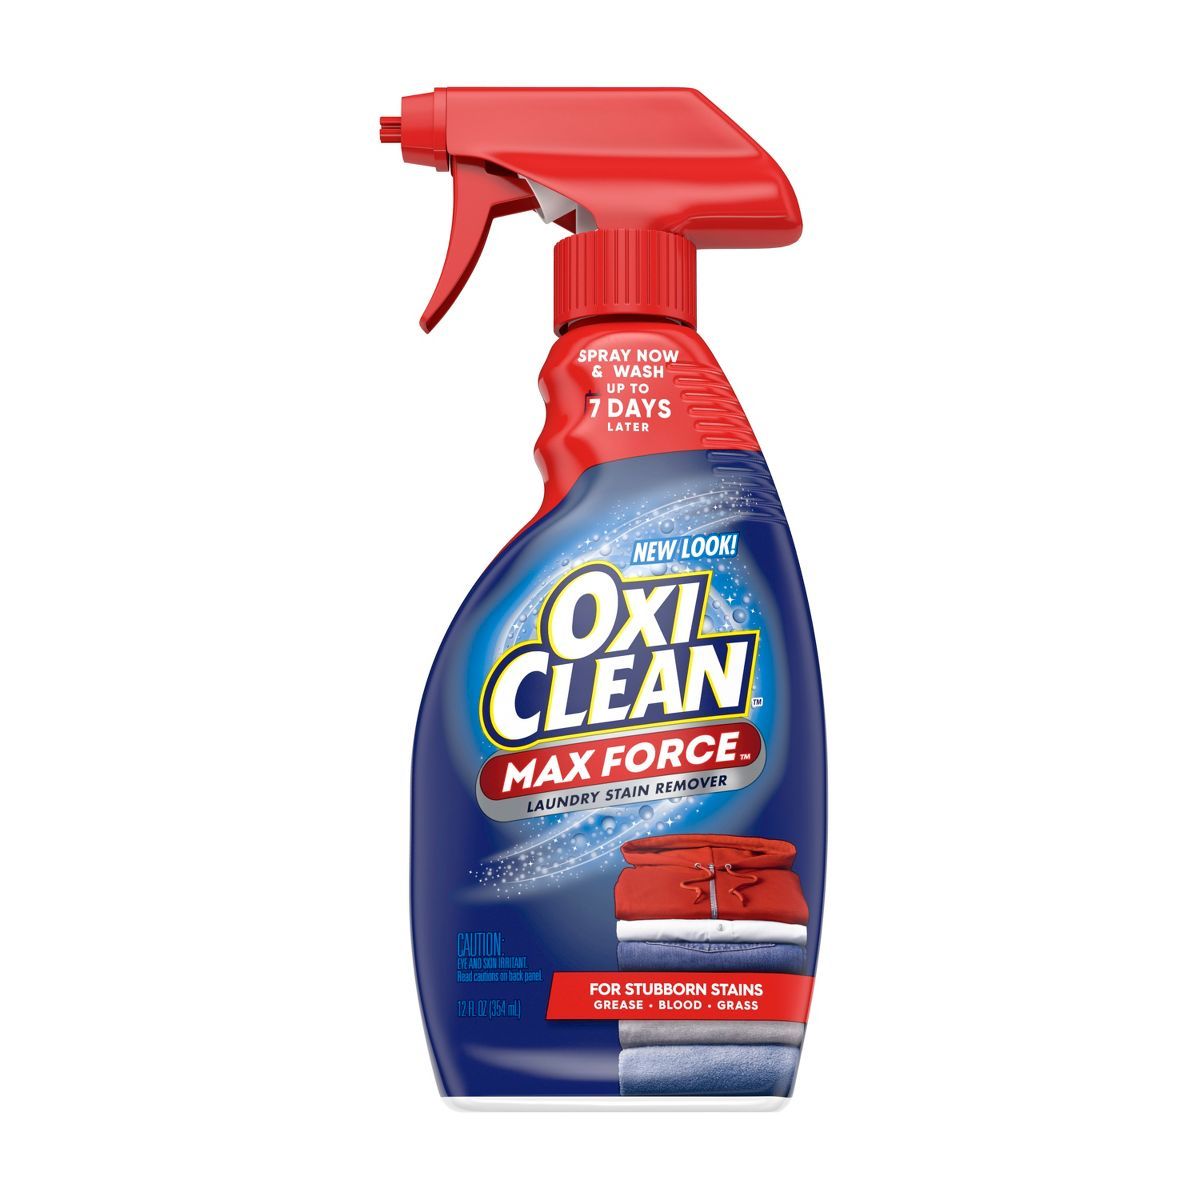 OxiClean MaxForce Laundry Stain Remover Spray - 12 fl oz | Target